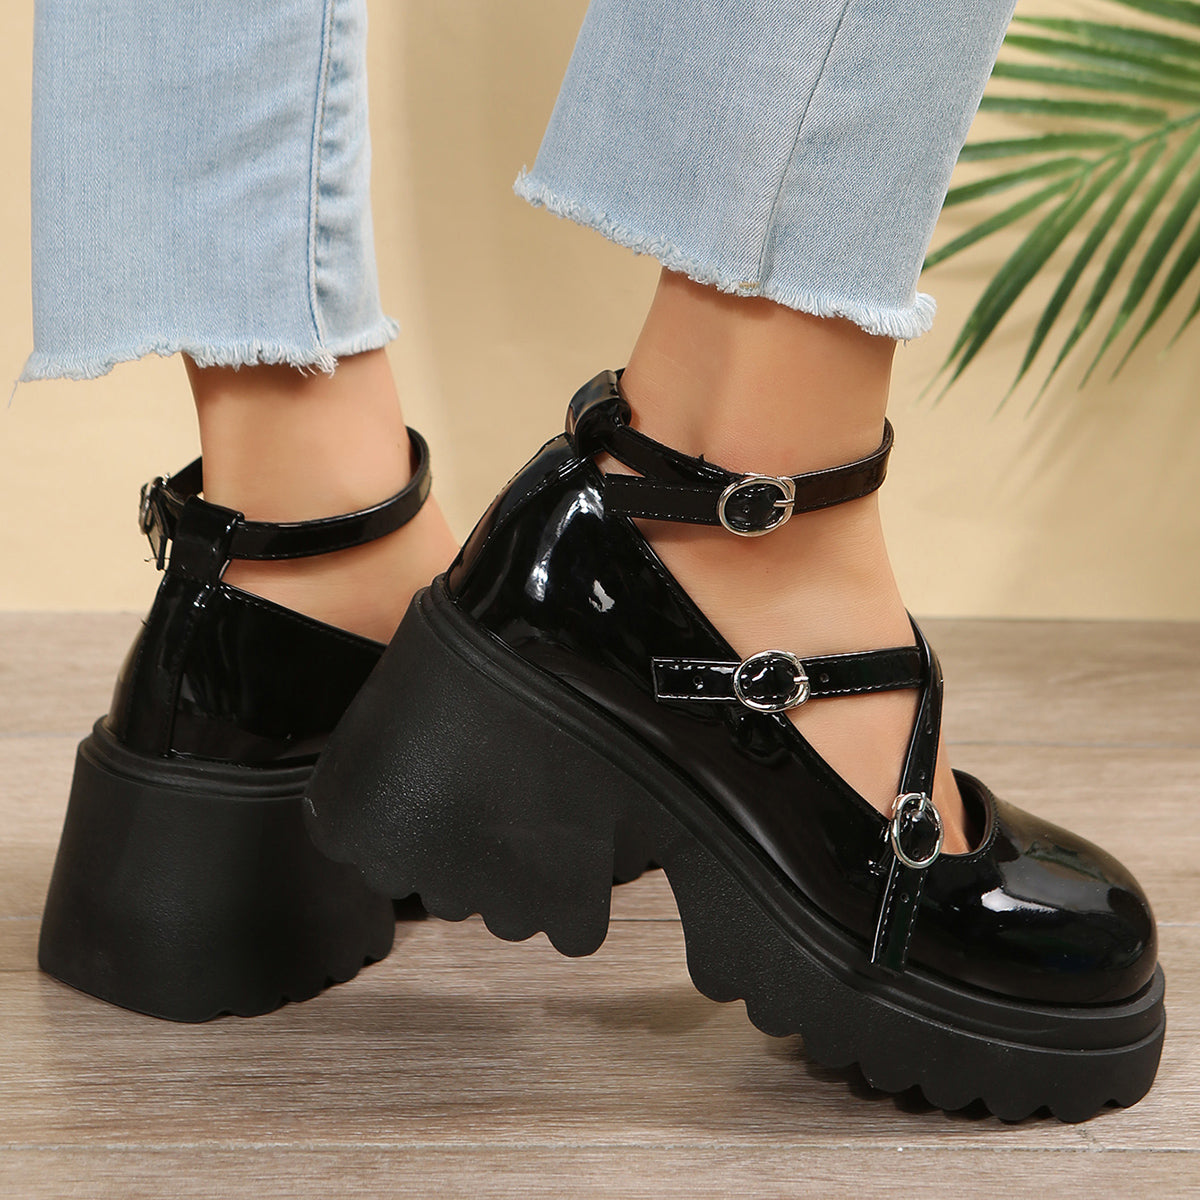 Doubled- the Double Strap Patent Vinyl Platform Mary Jane Shoes